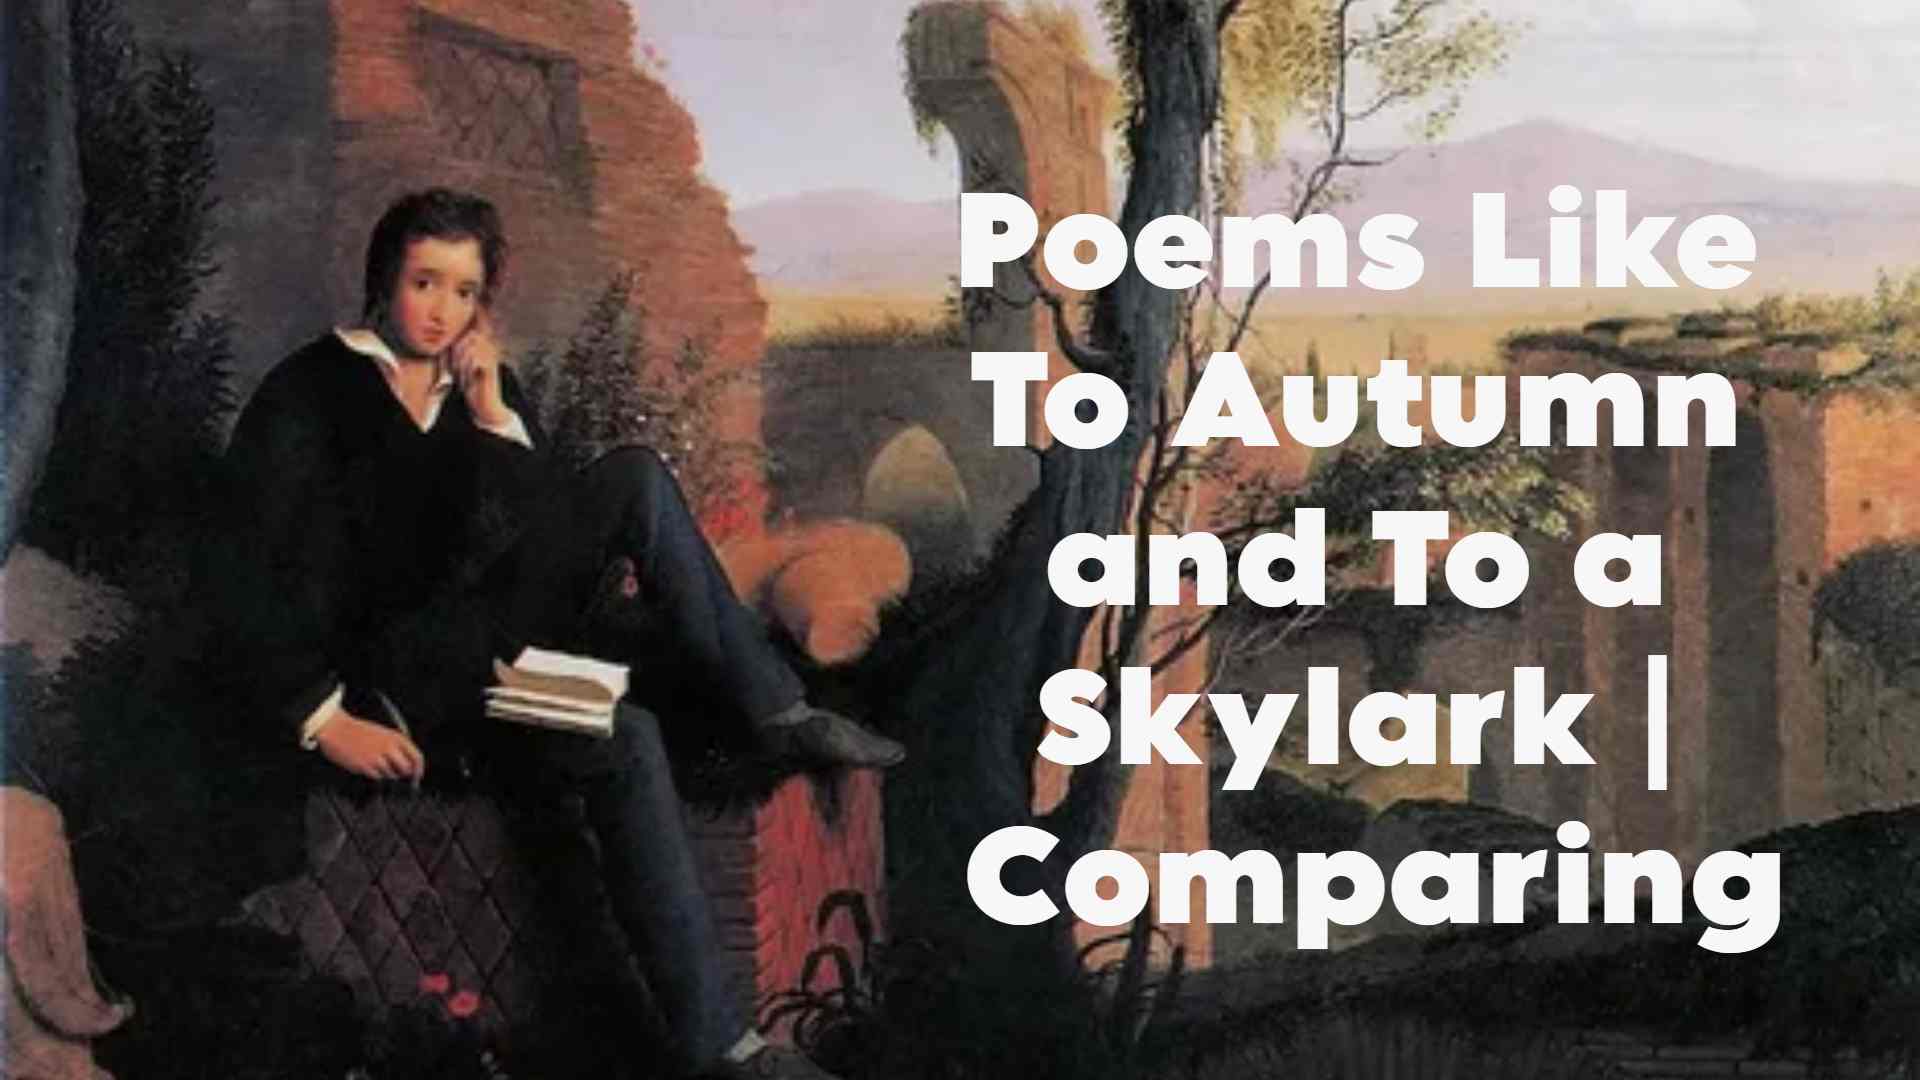 poems like to autumn and to a skylark